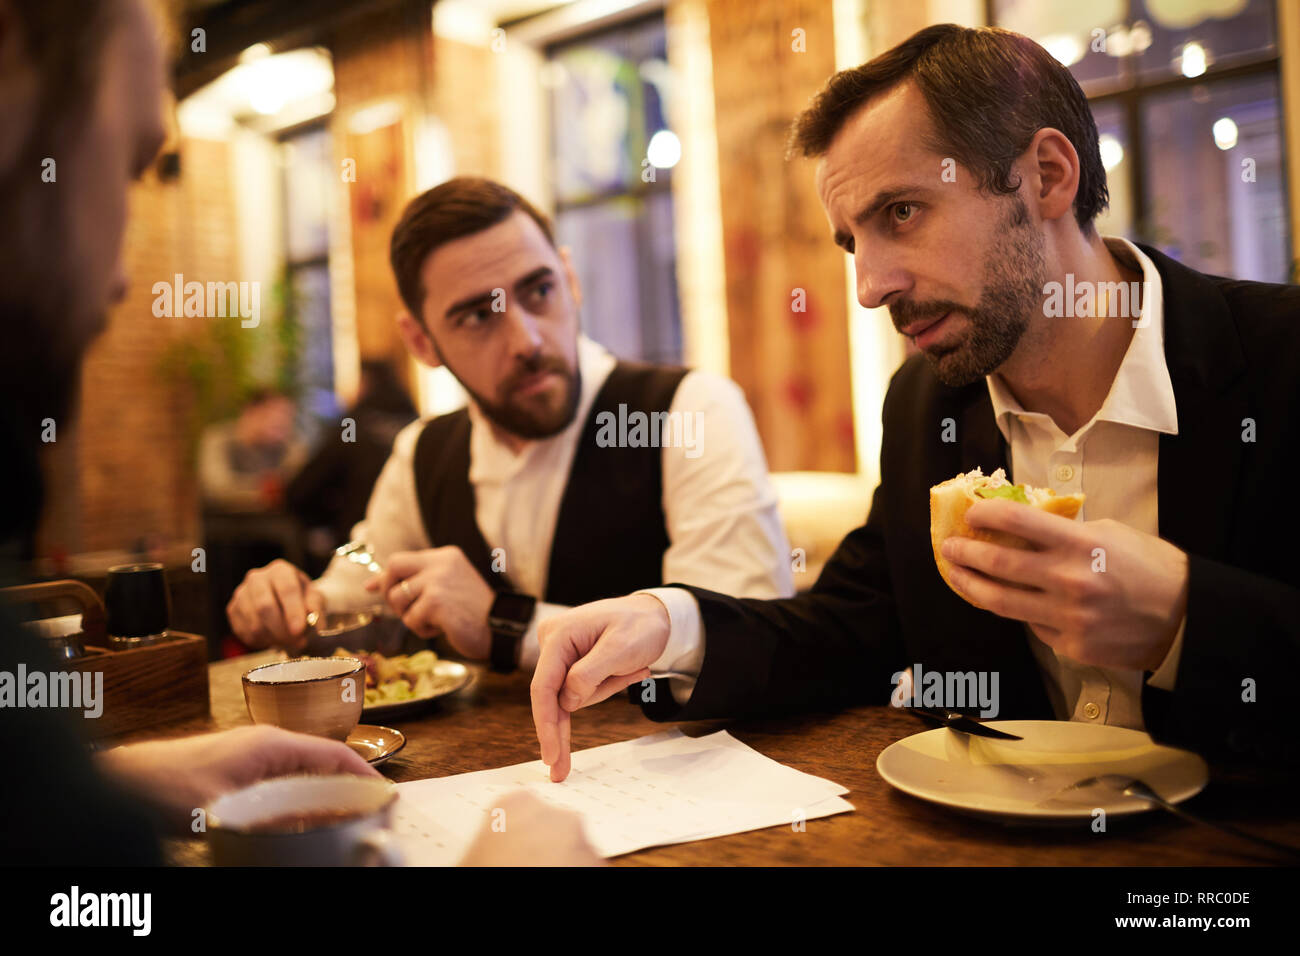 Two Business People in Restaurant Stock Photo